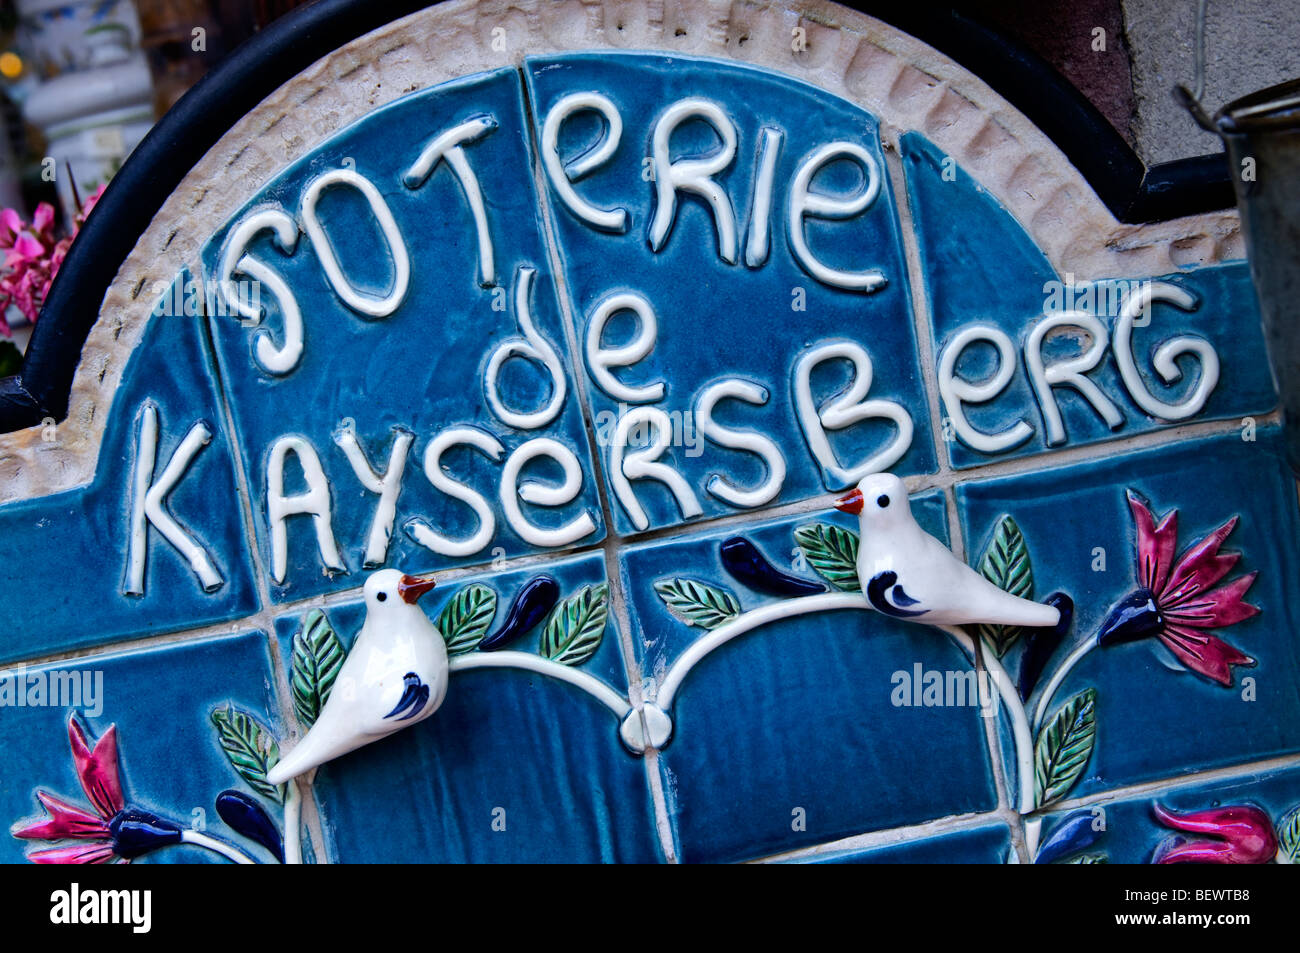 Poterie de Kaysersberg plaque outside renowned pottery shop in Kaysersberg Alsace France Stock Photo